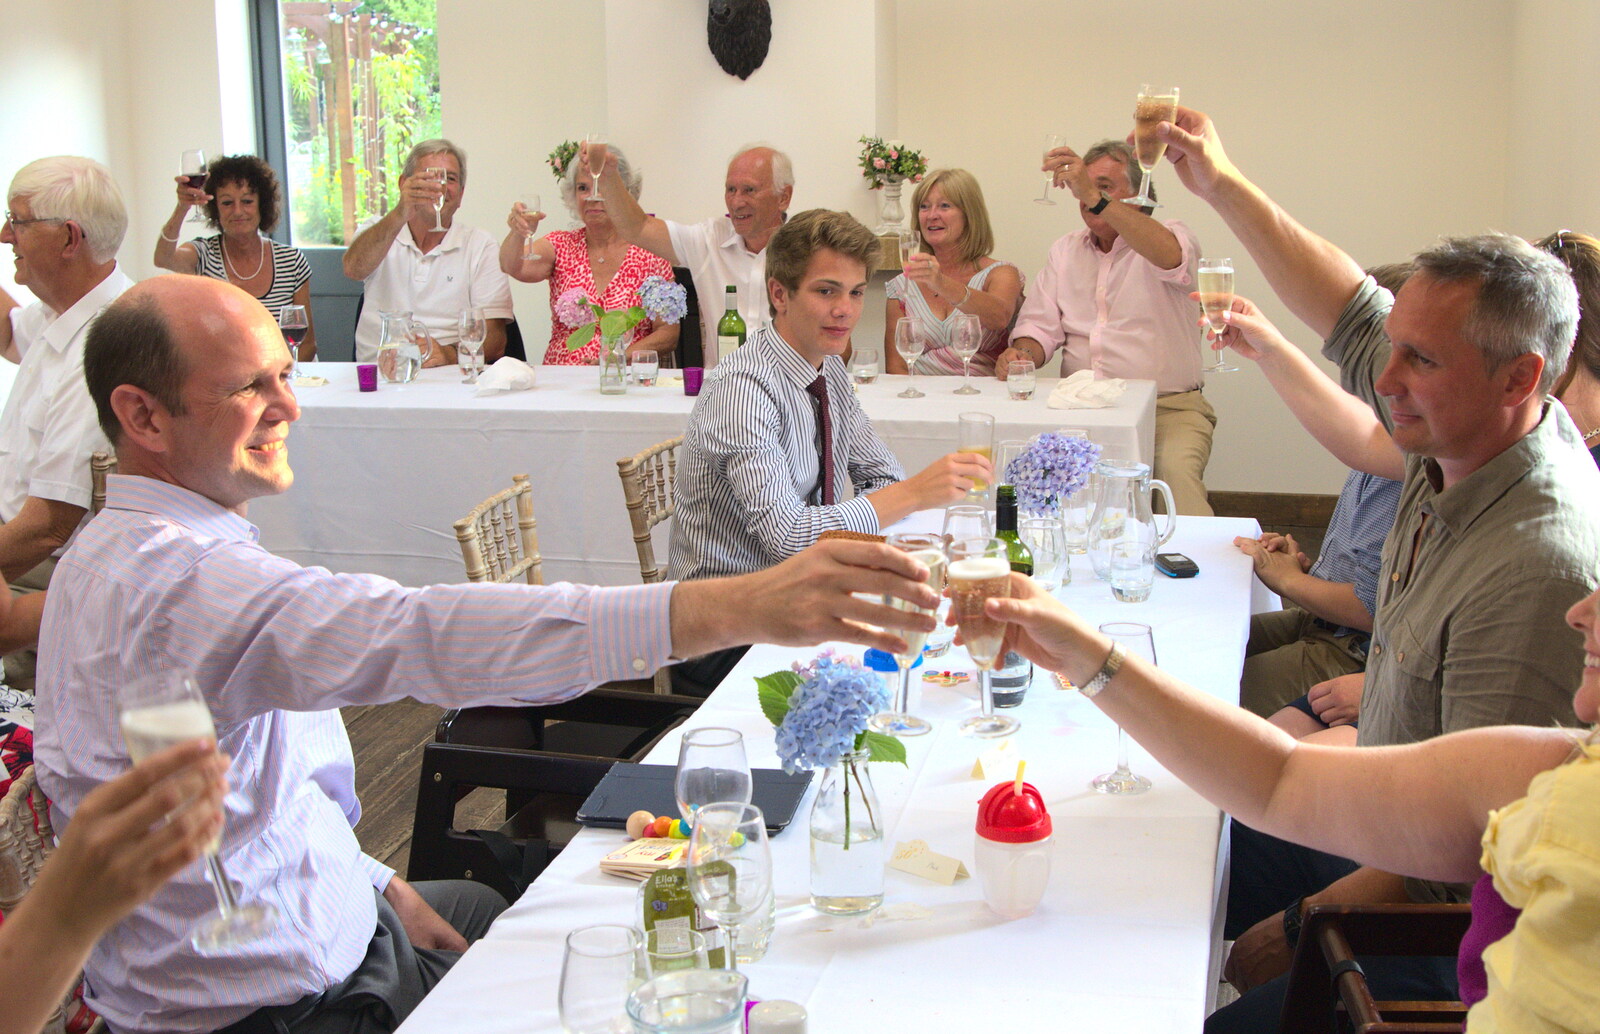 A toast to fifty years from Bob and Bernice's 50th Wedding Anniversary, Hinton Admiral, Dorset - 25th July 2014